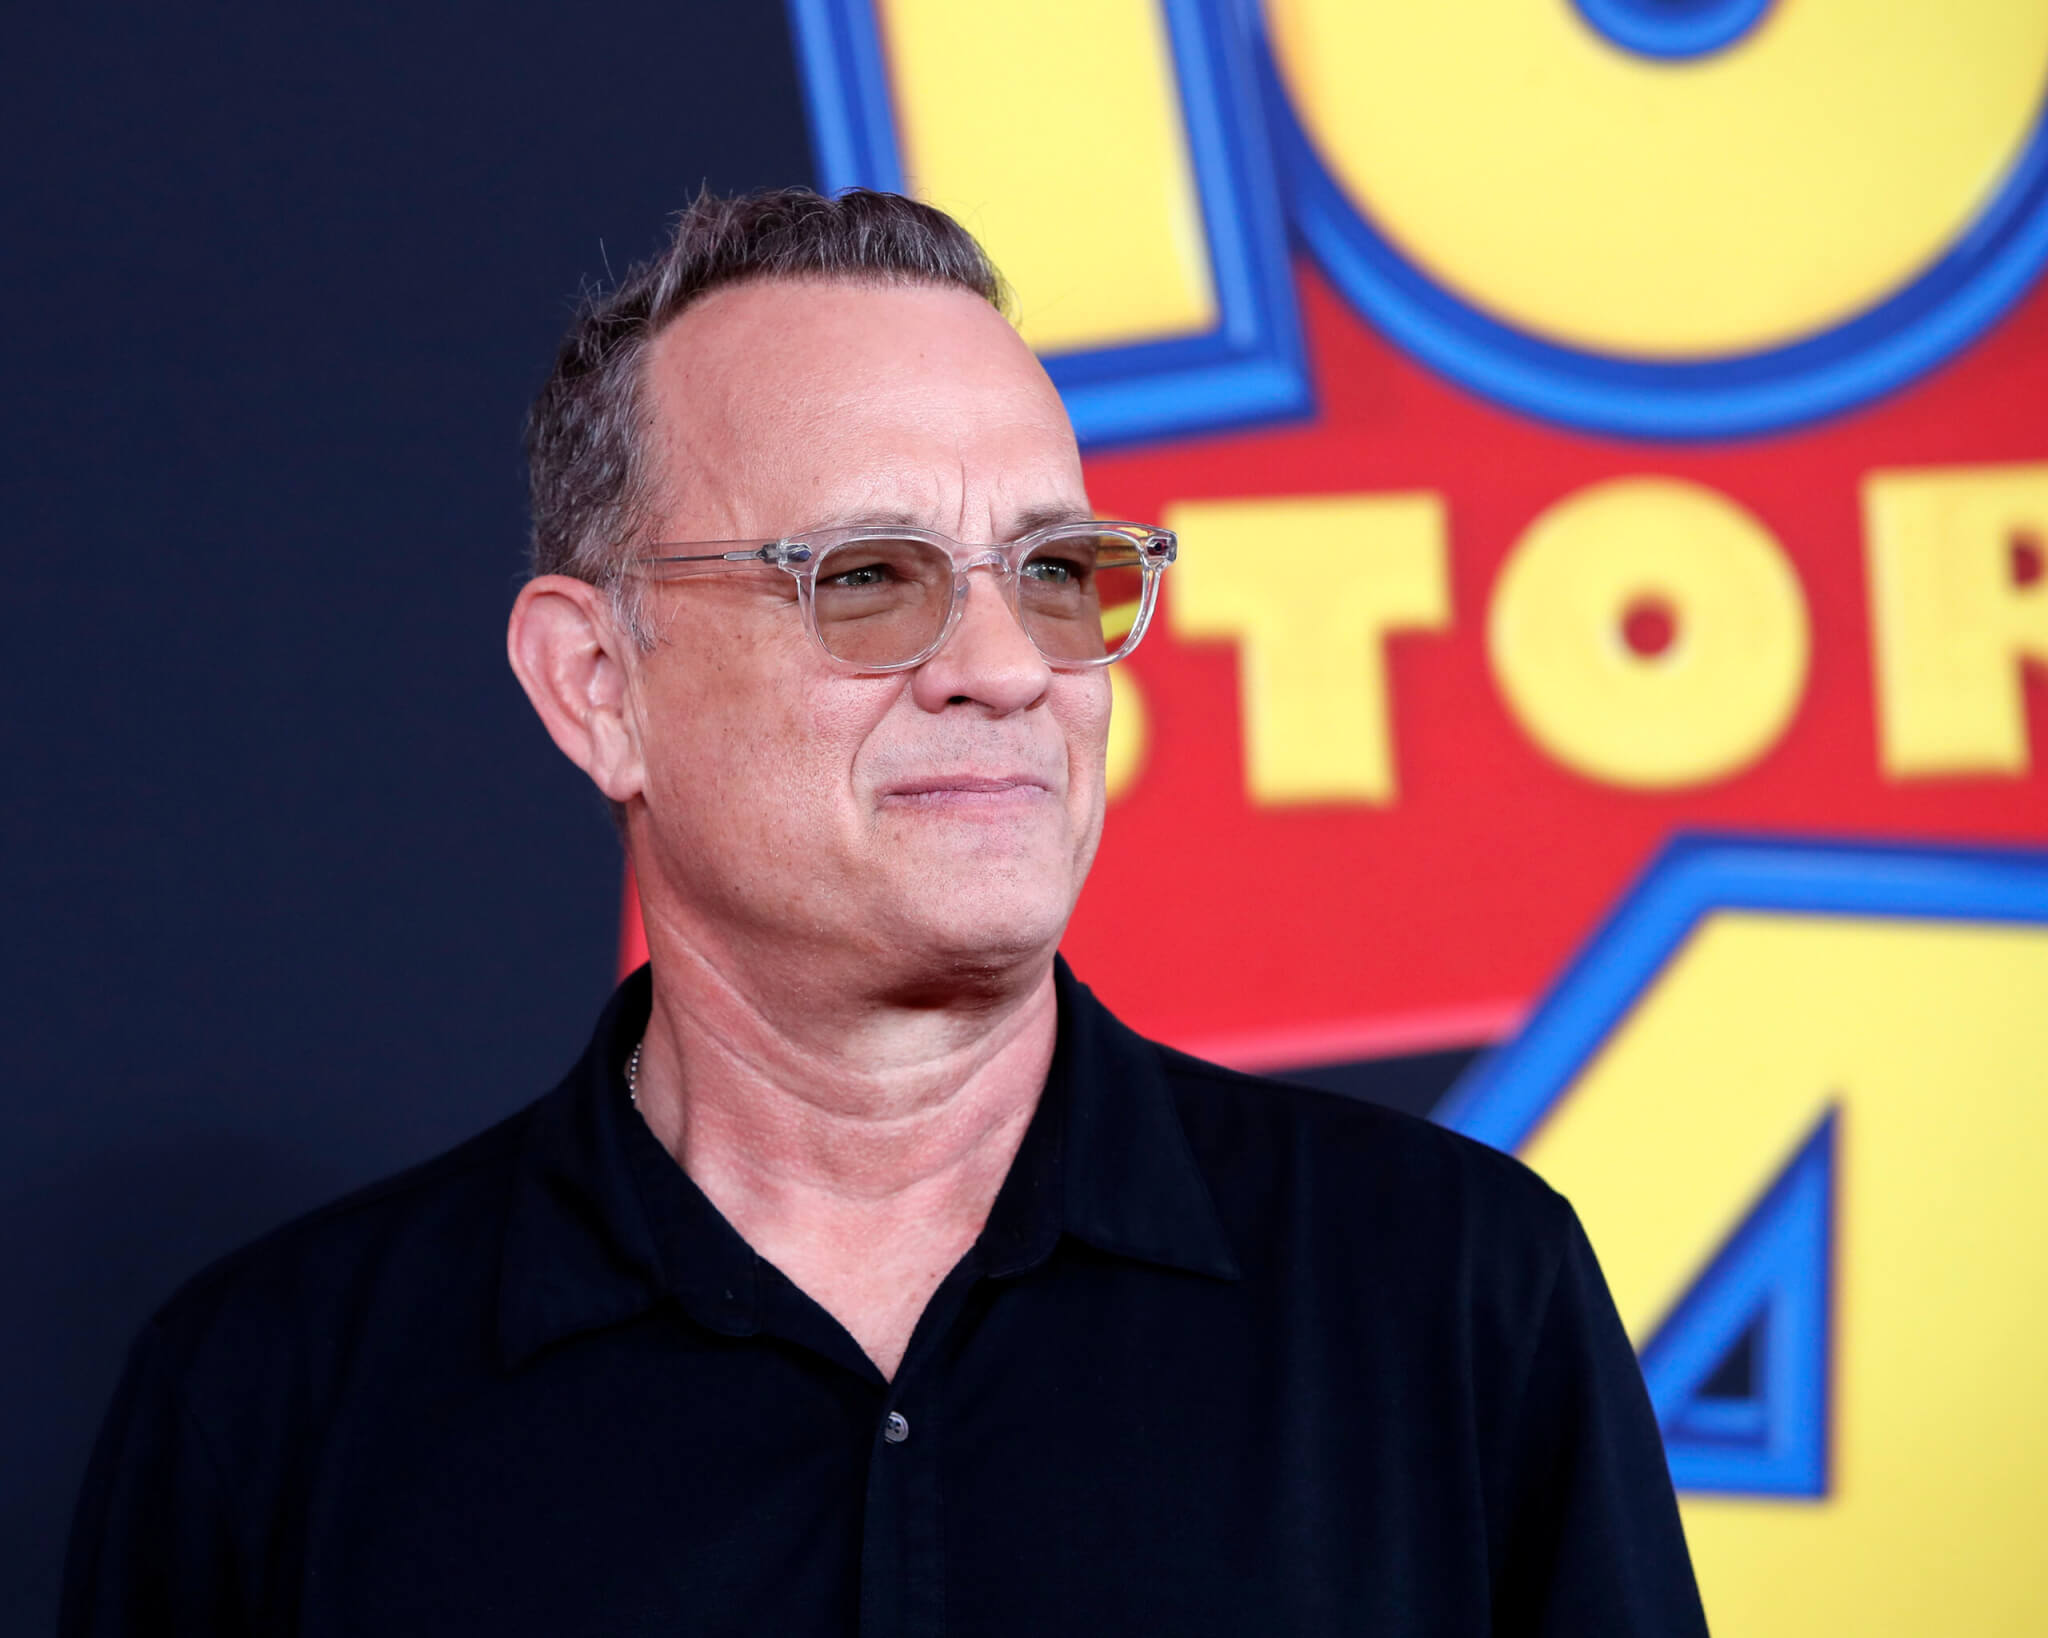 Tom Hanks at the 2019 premiere of "Toy Story 4"